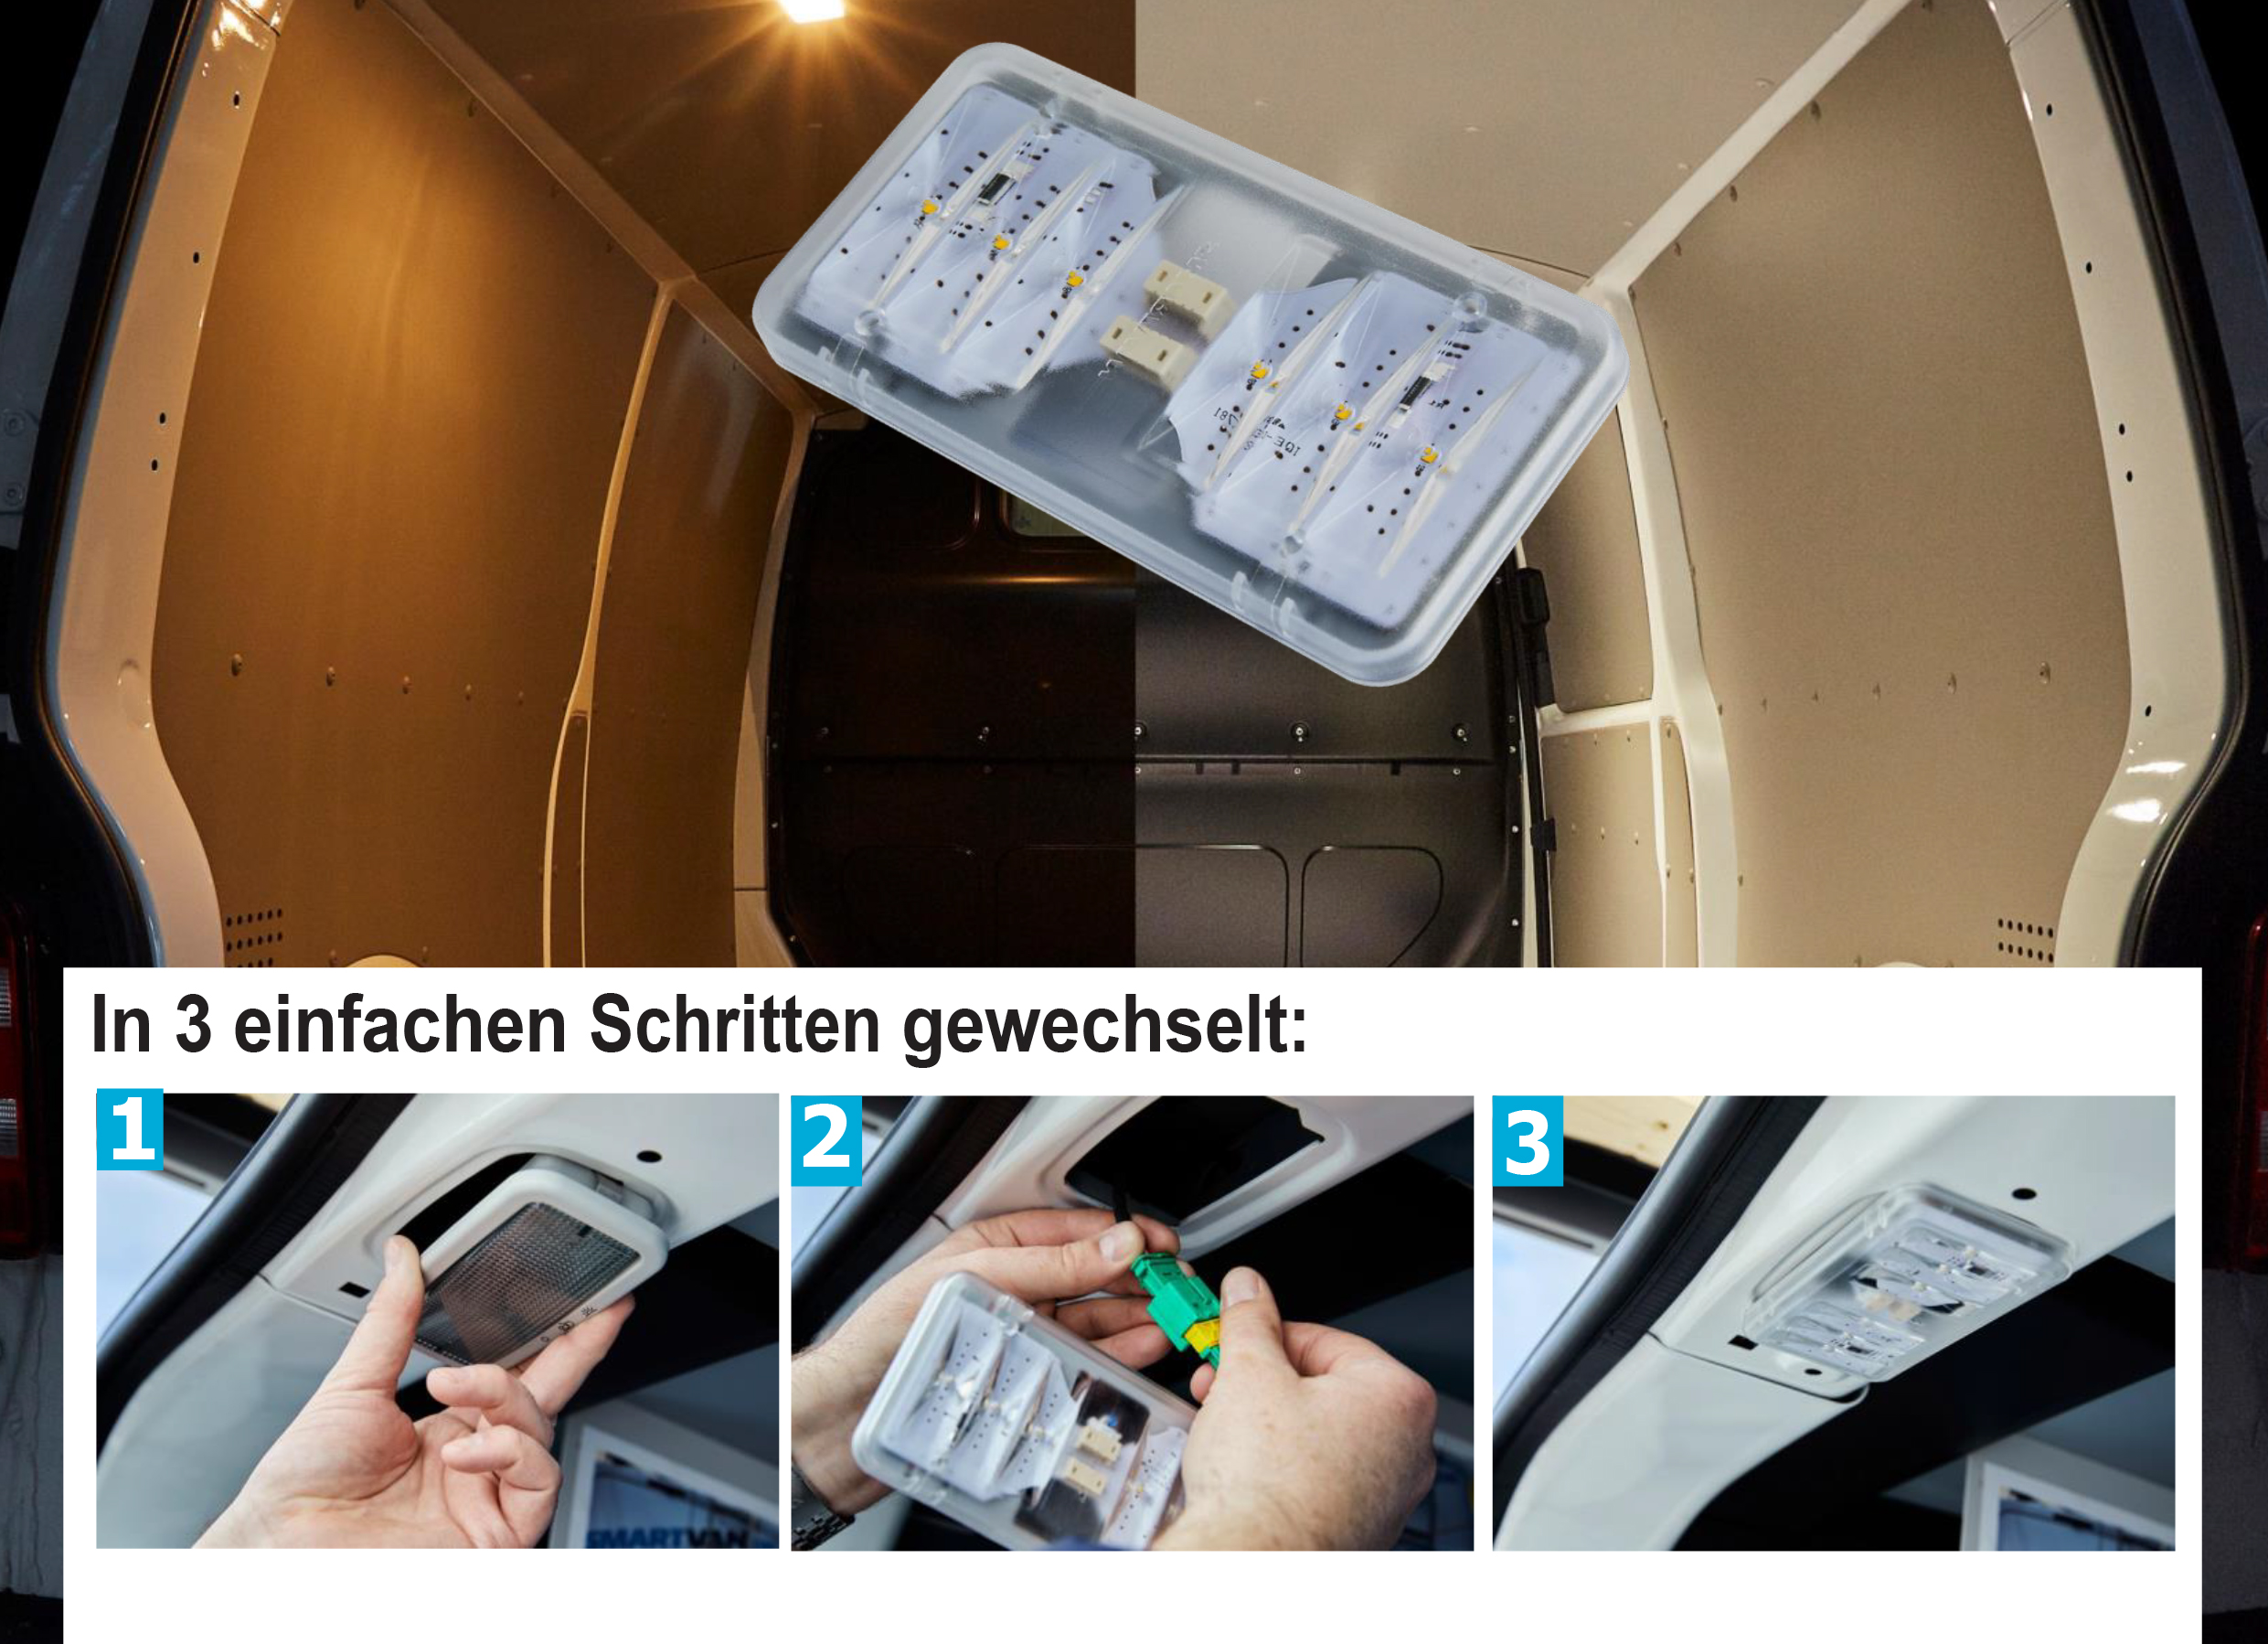 LED Laderaumbeleuchtung 3x1meter Wohnmobil Innenraumbeleuchtung